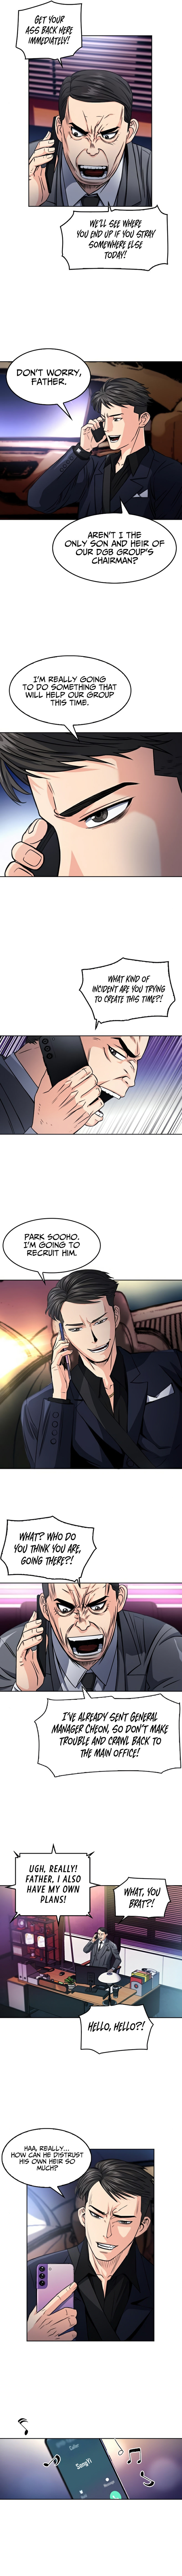 Seoul Station Druid - Chapter 49 Page 3